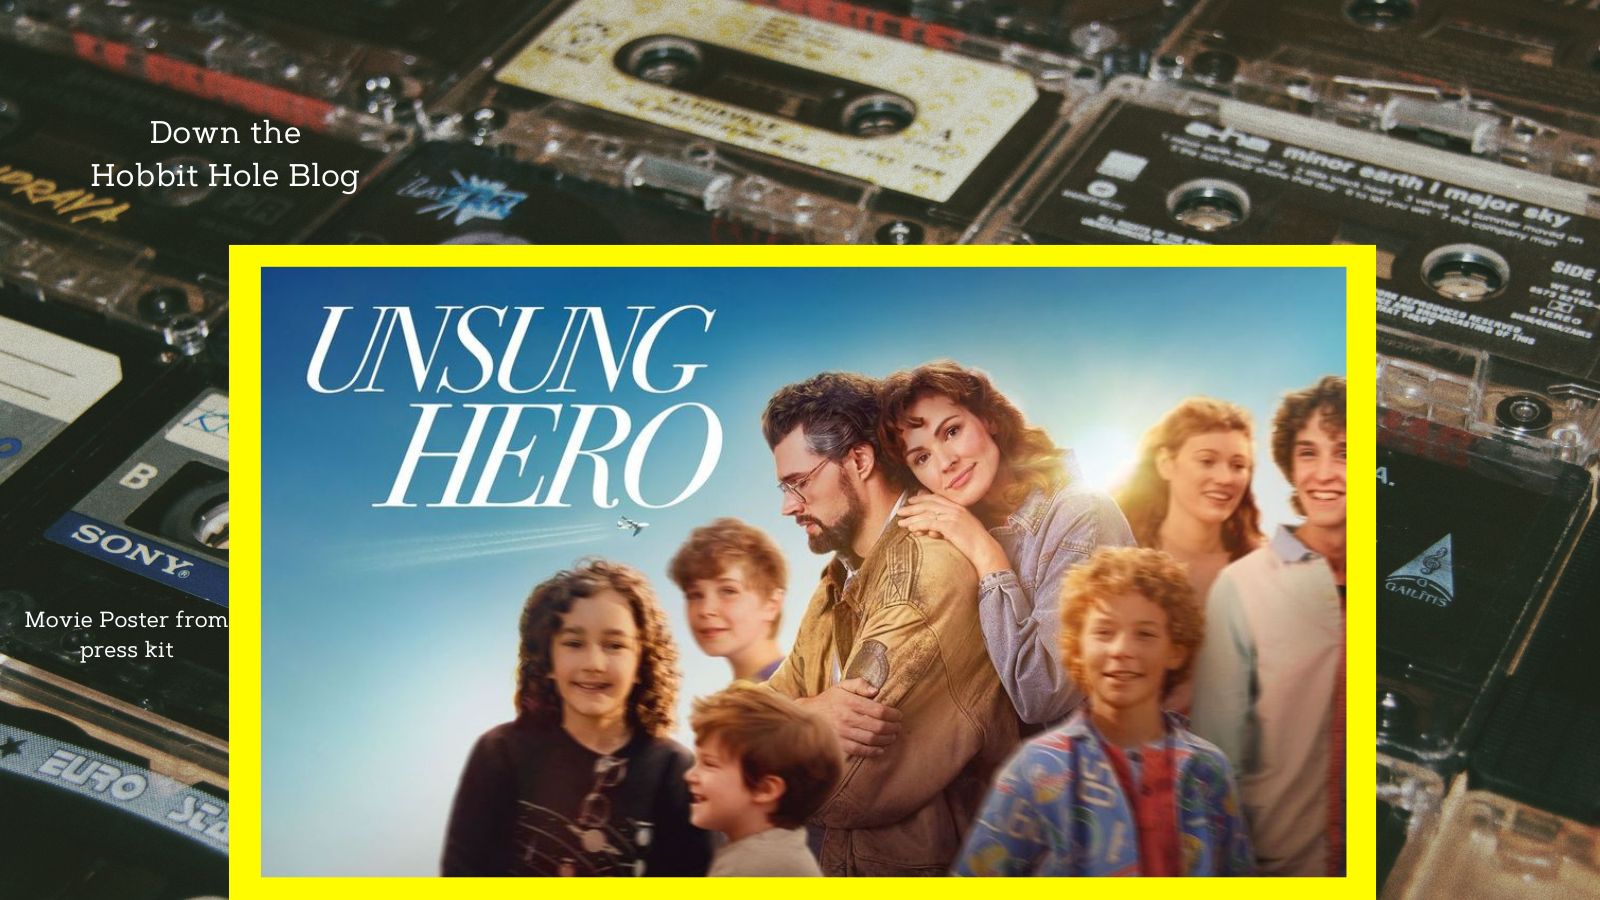 Unsung hero about the for king and country movie parent review discussion questions action steps to take